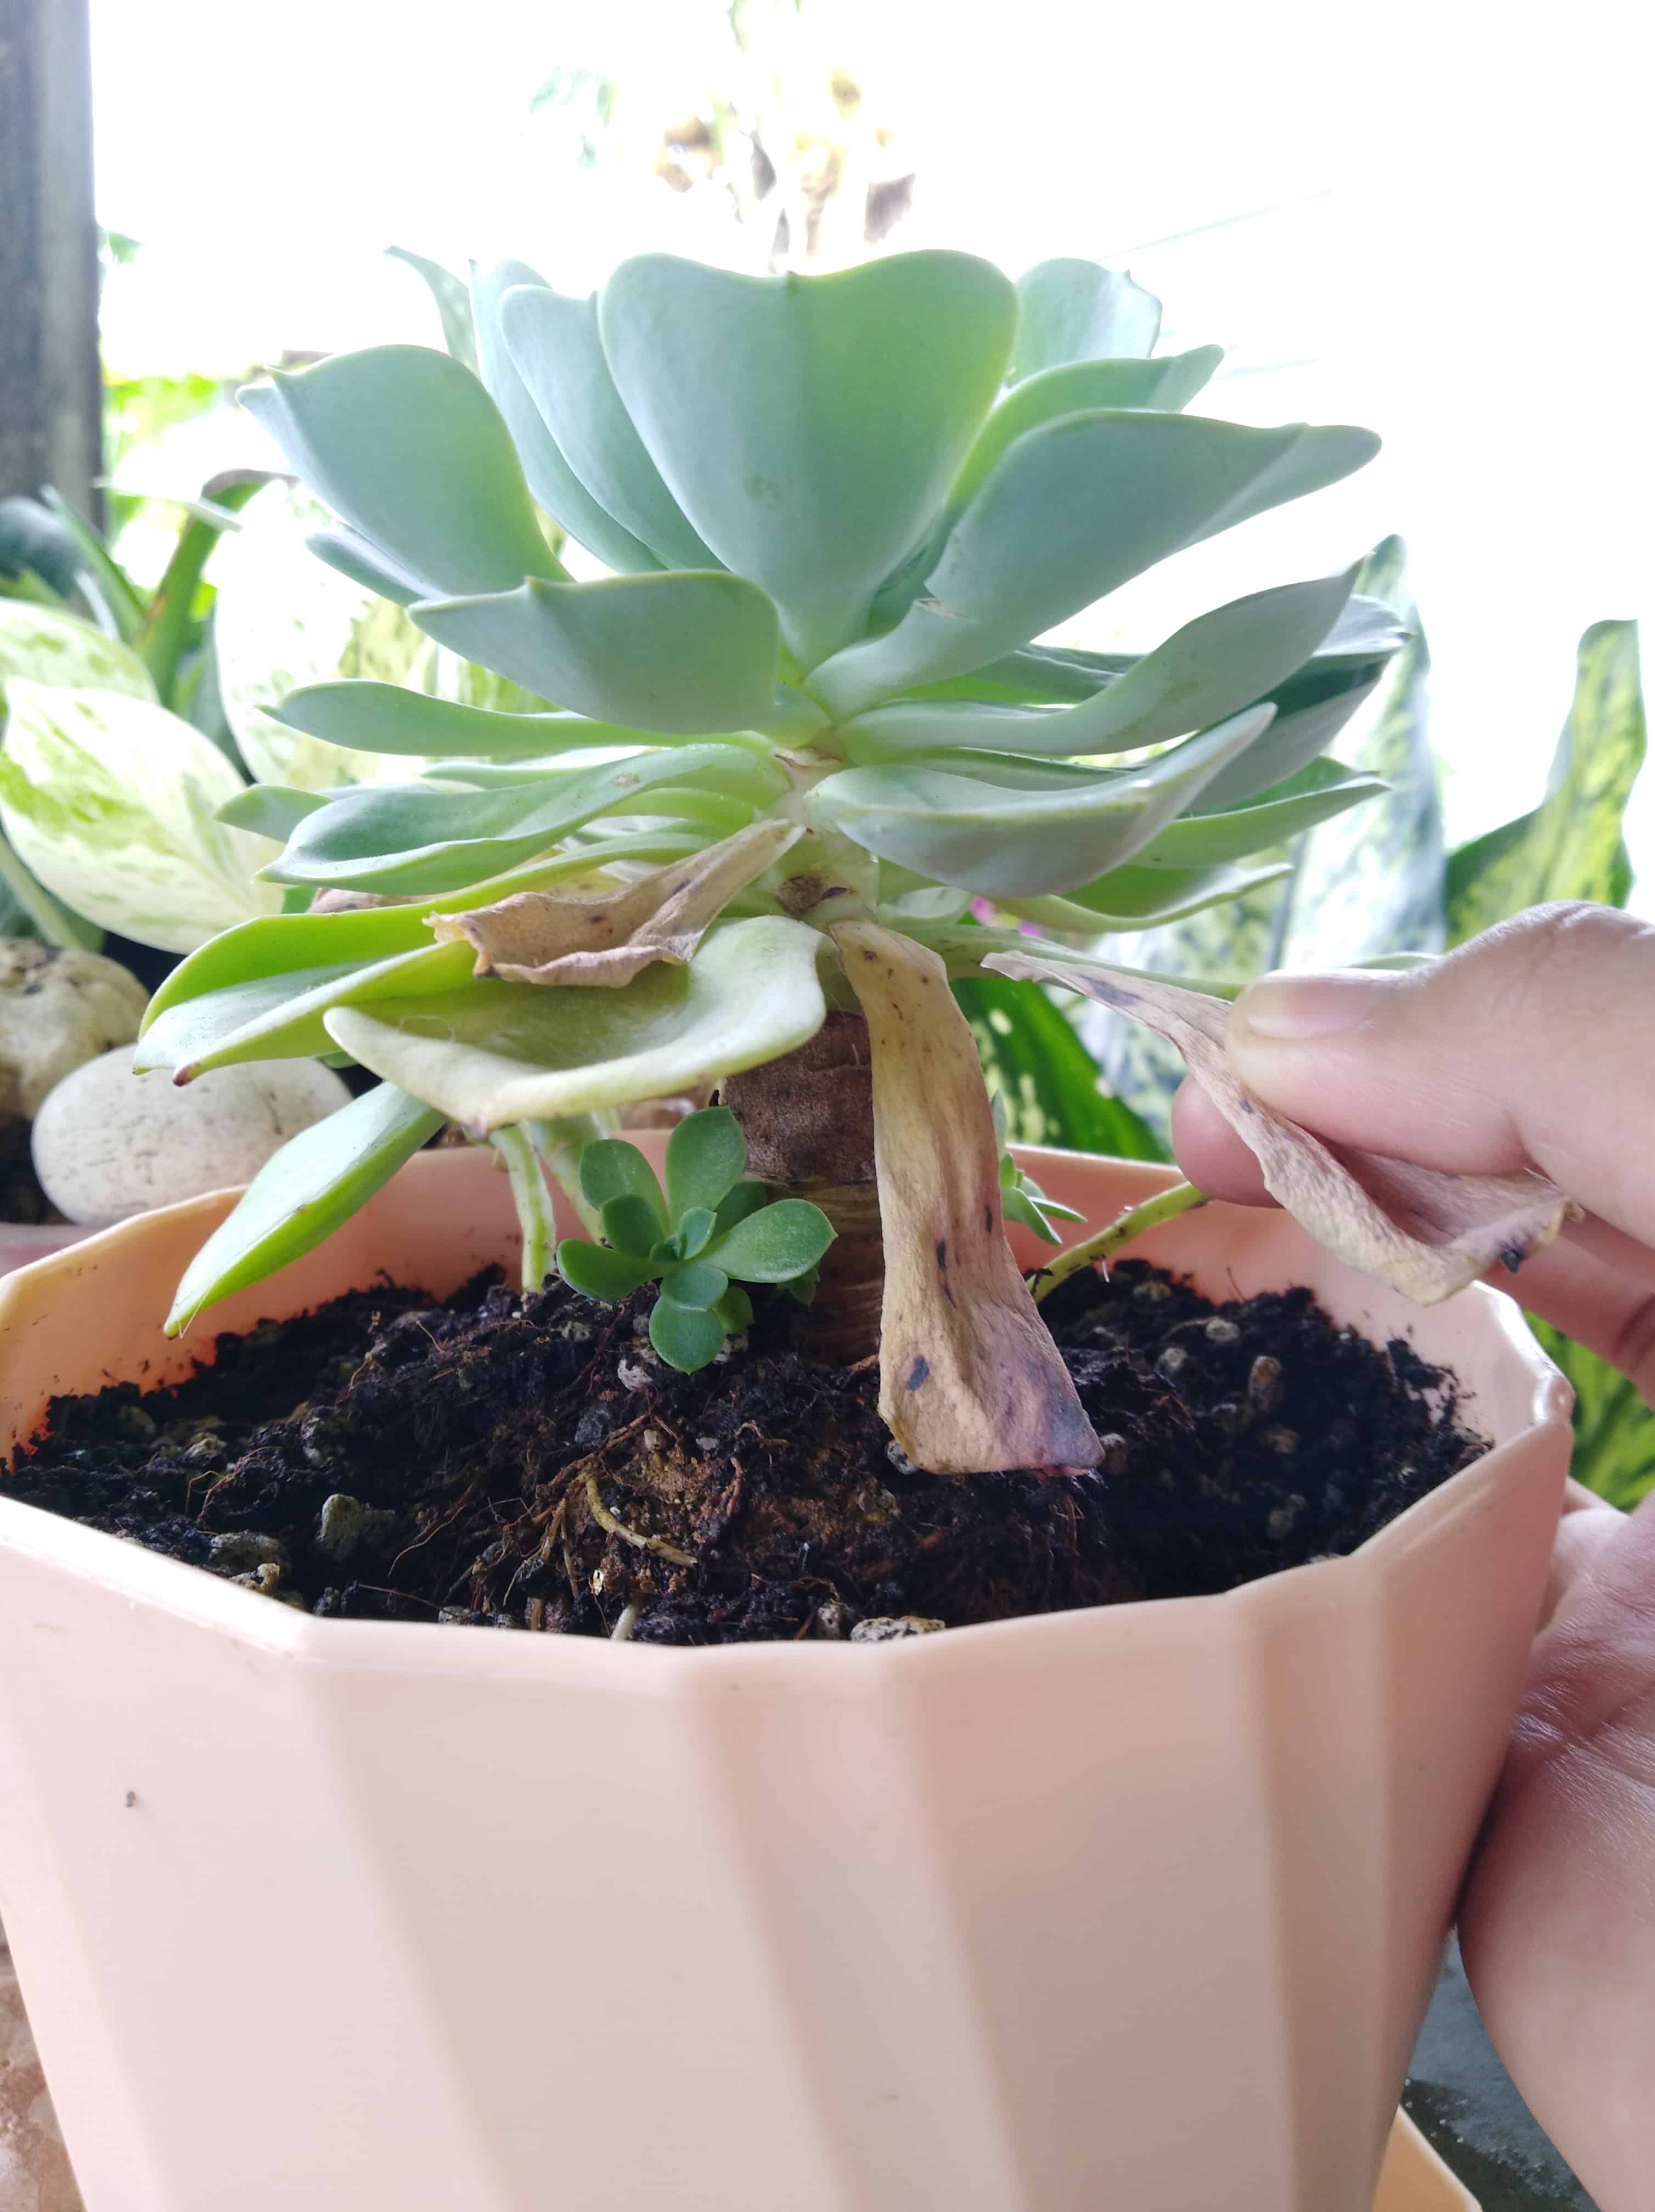 Removing brown, crisped leaves off a rose cabbage succulent.